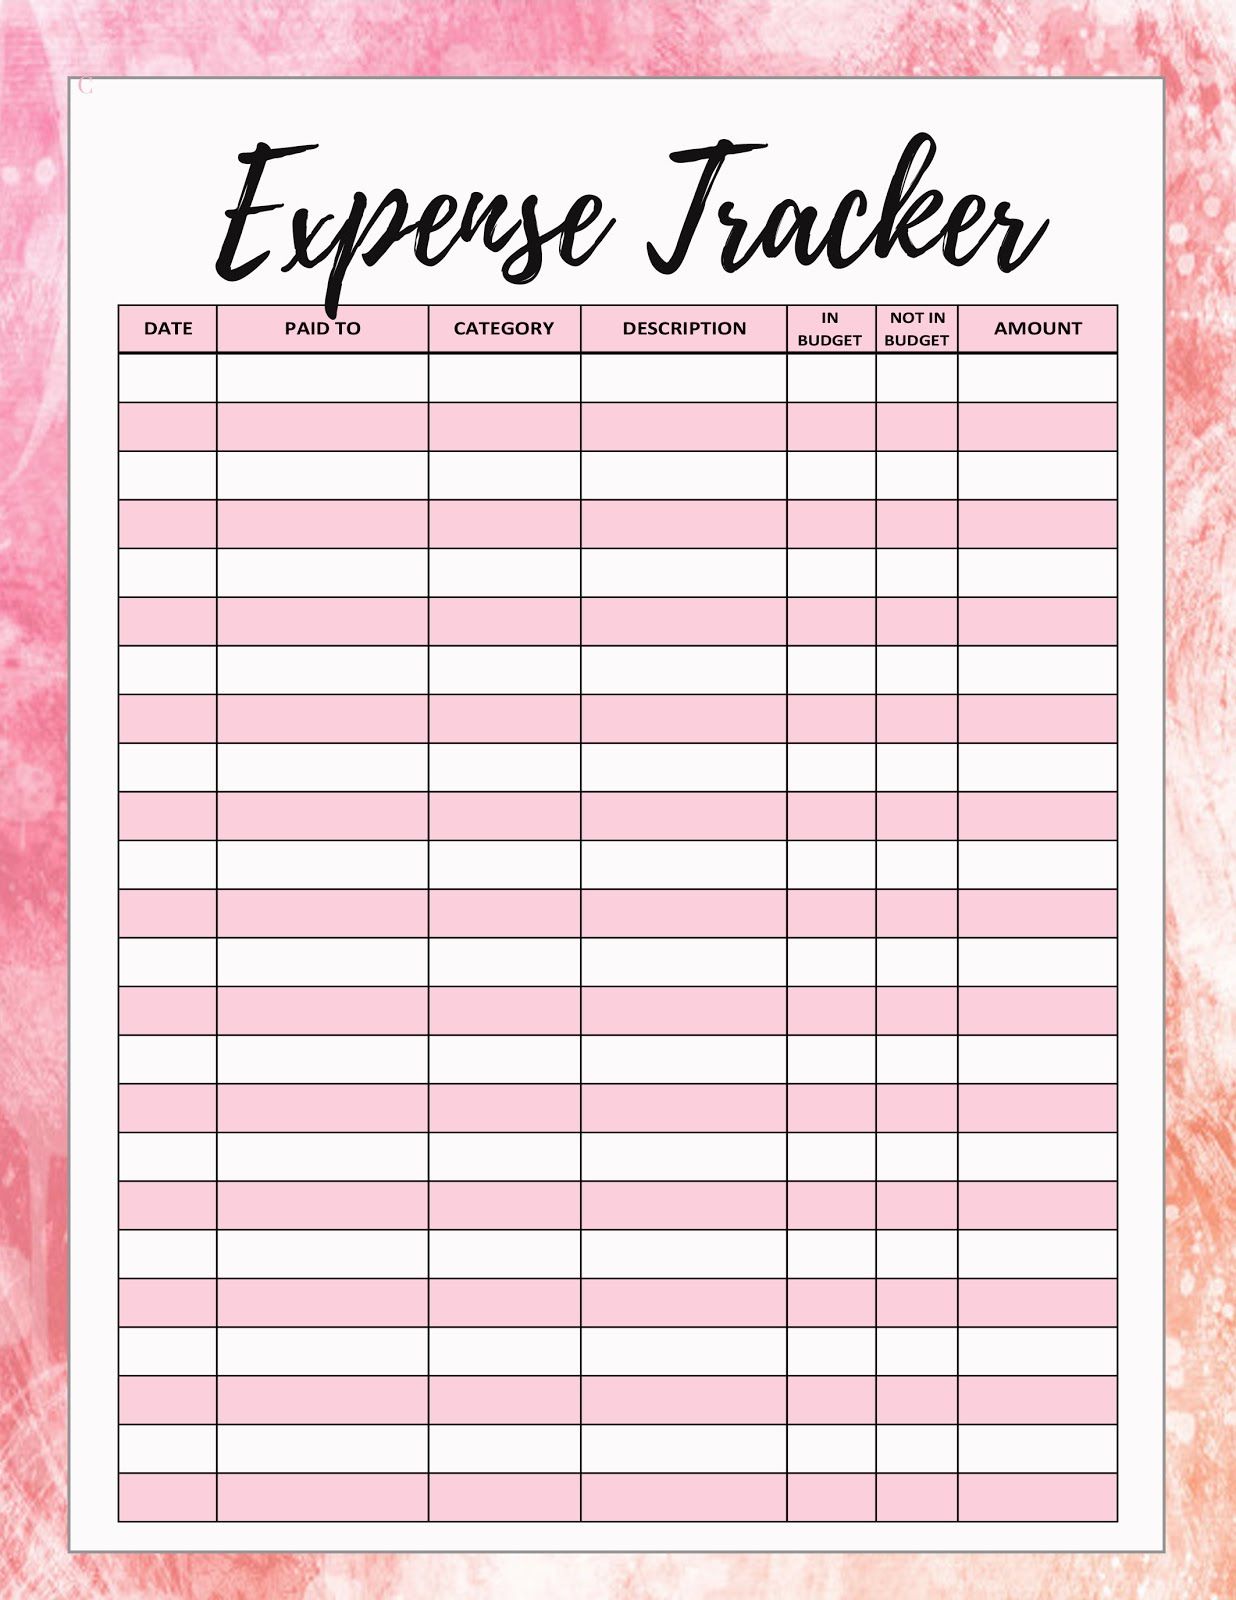 expense tracker printable   April.onthemarch.co